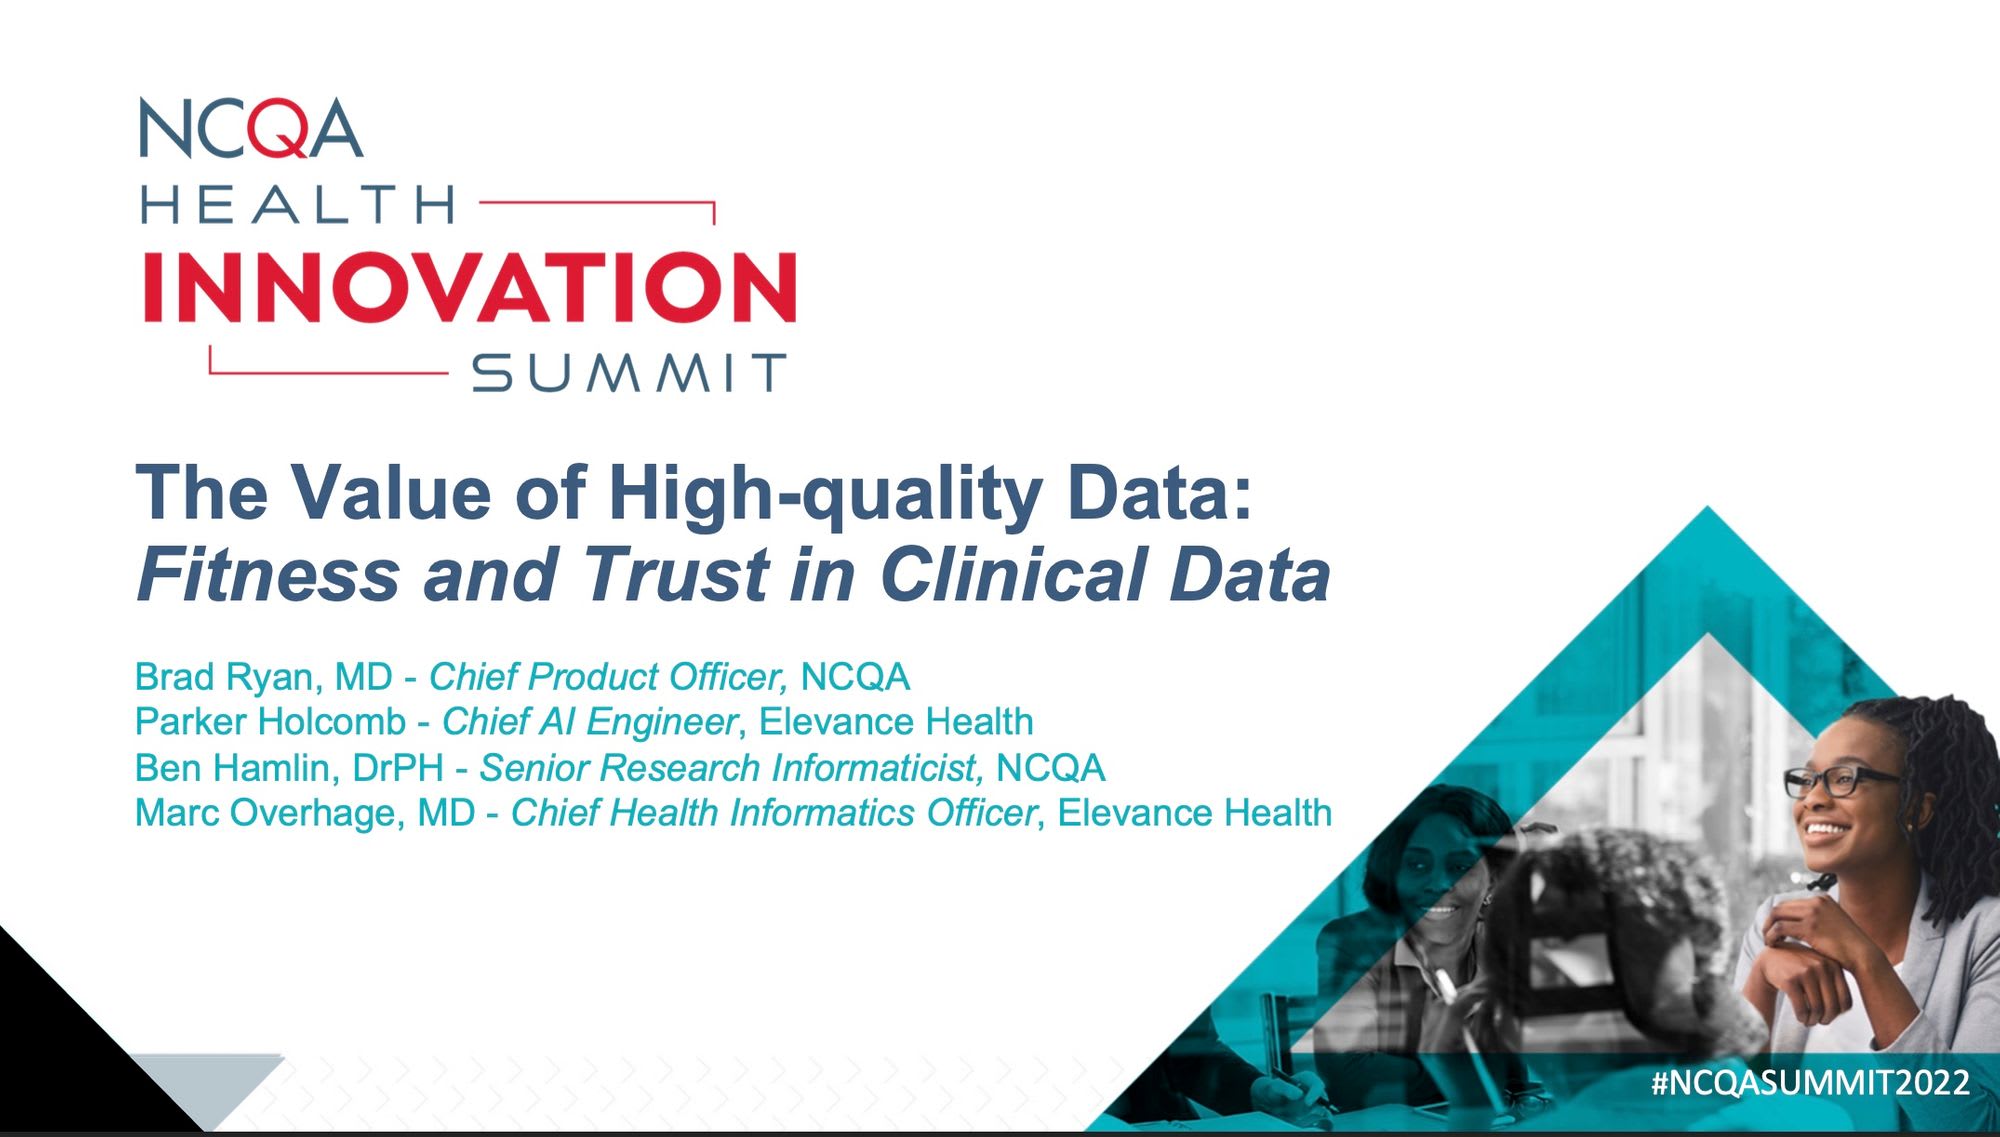 The Value of High-Quality Data: Fitness and Trust in Clinical Data